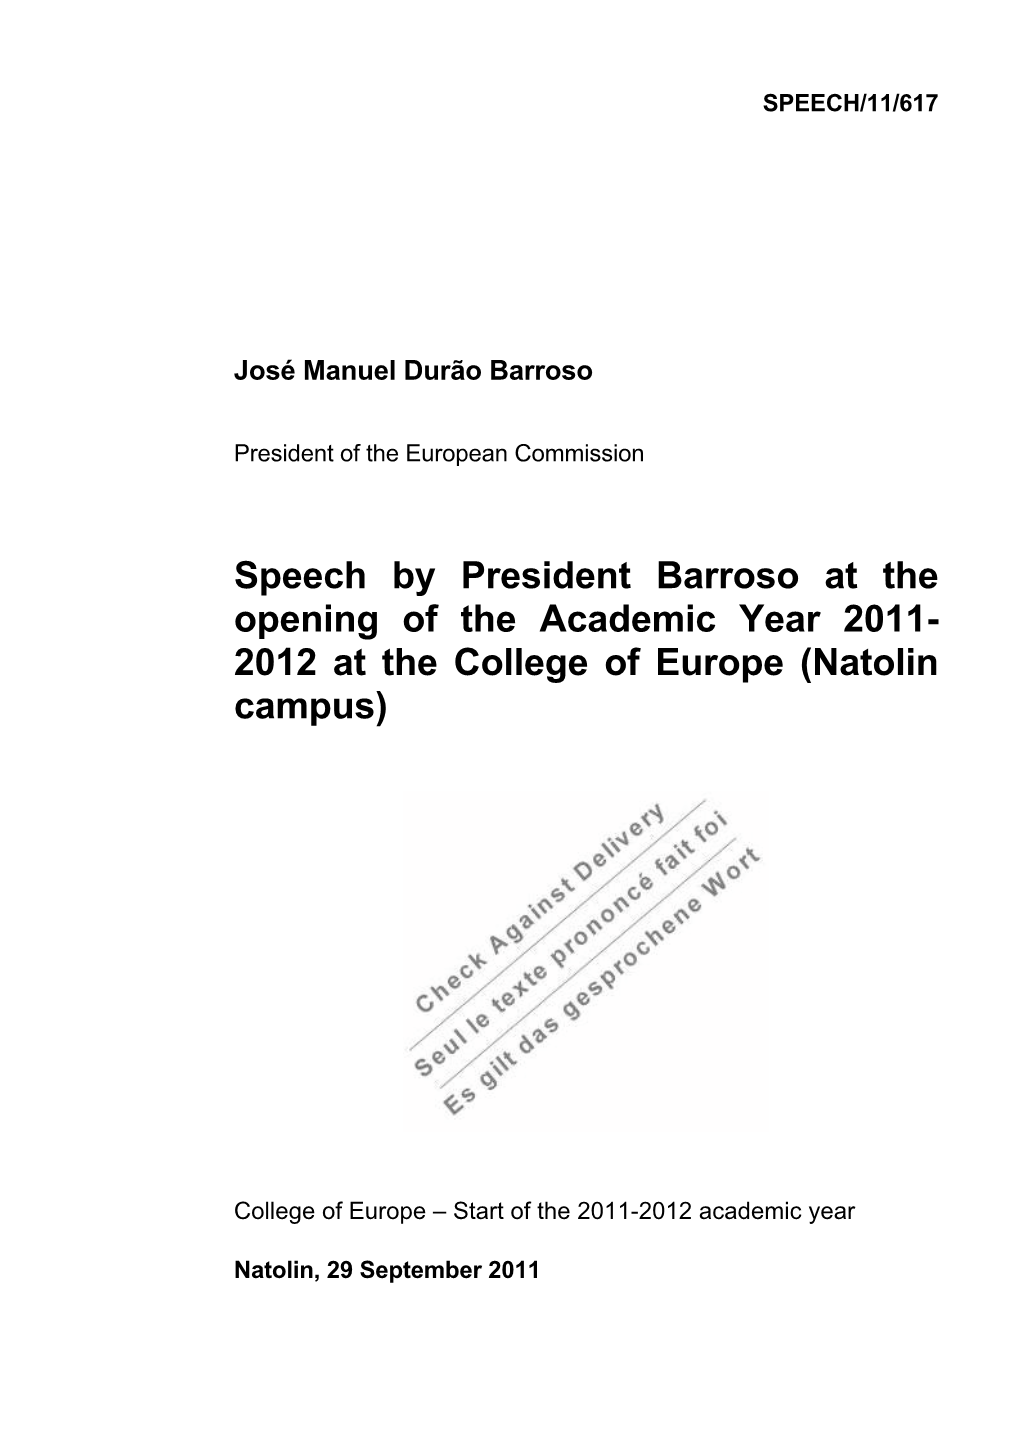 Speech by President Barroso at the Opening of the Academic Year 2011- 2012 at the College of Europe (Natolin Campus)